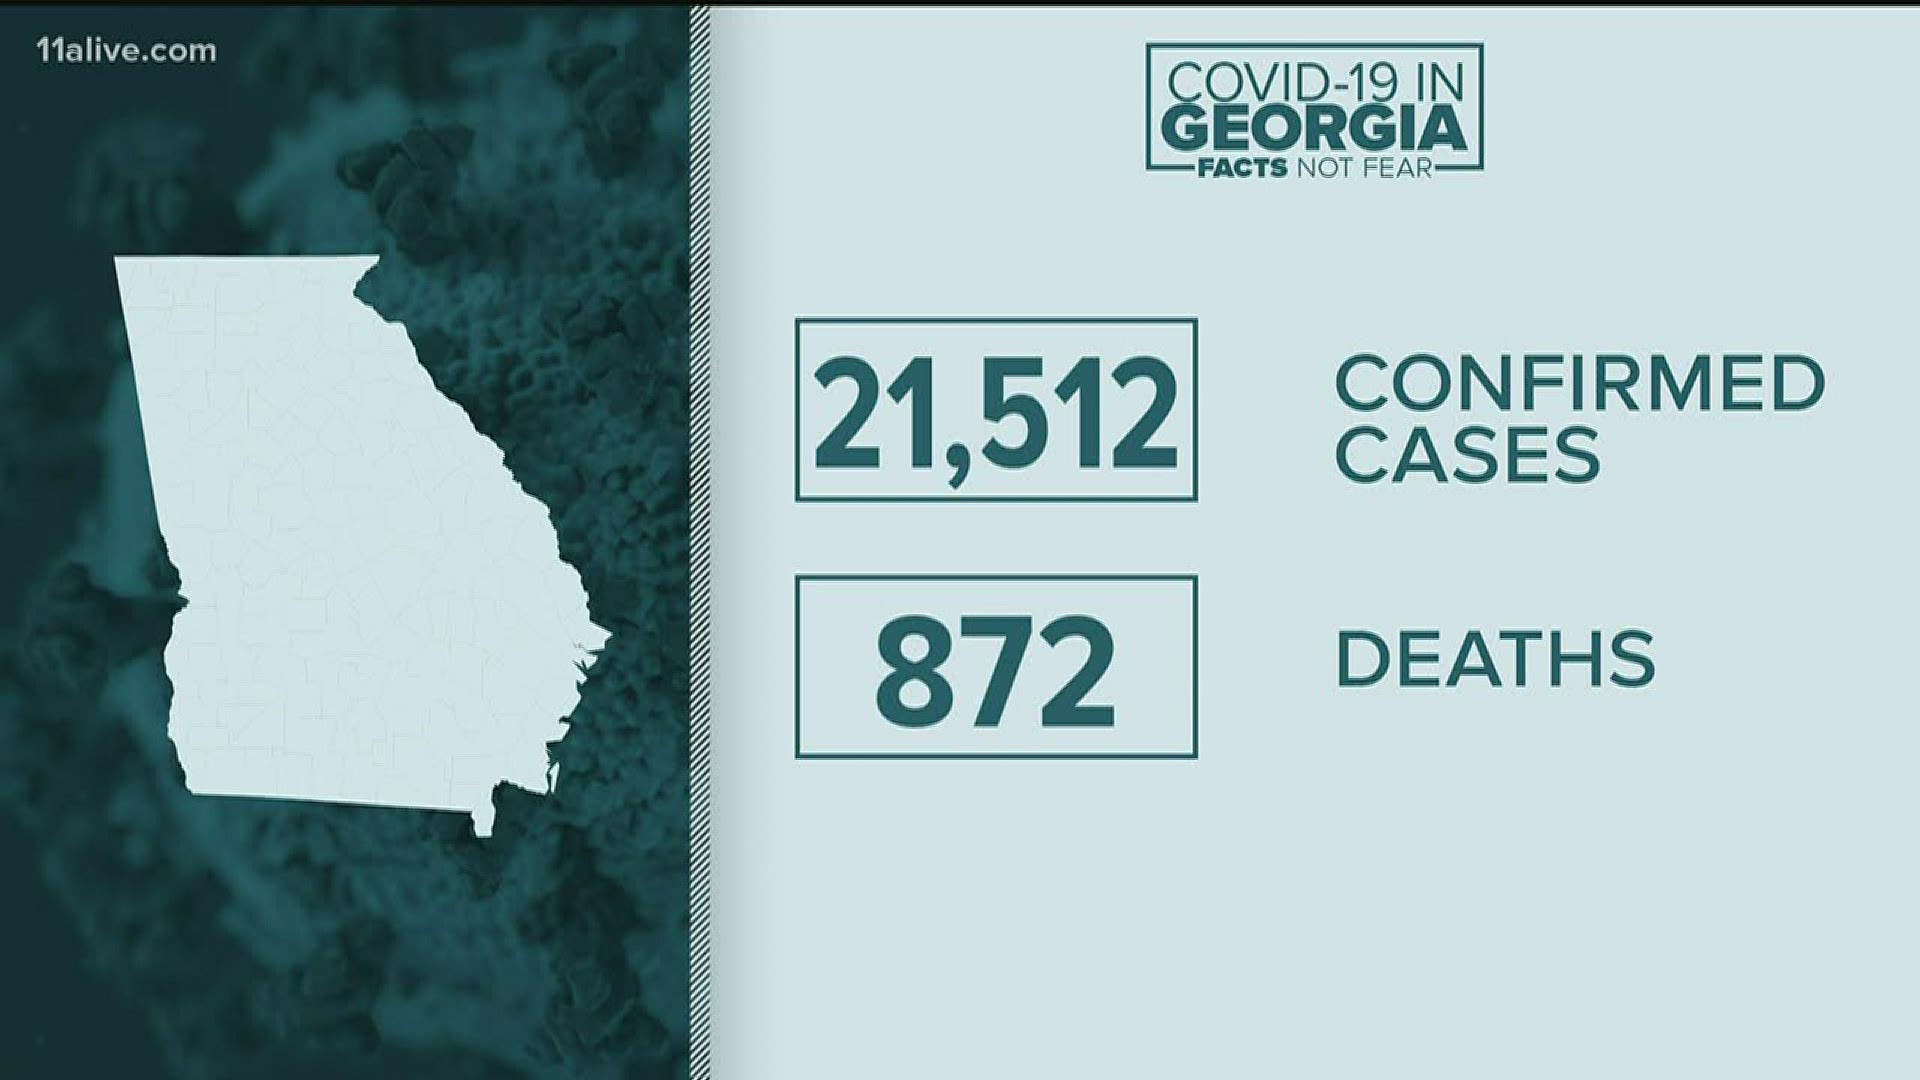 Confirmed cases are at more than 21K at this time.